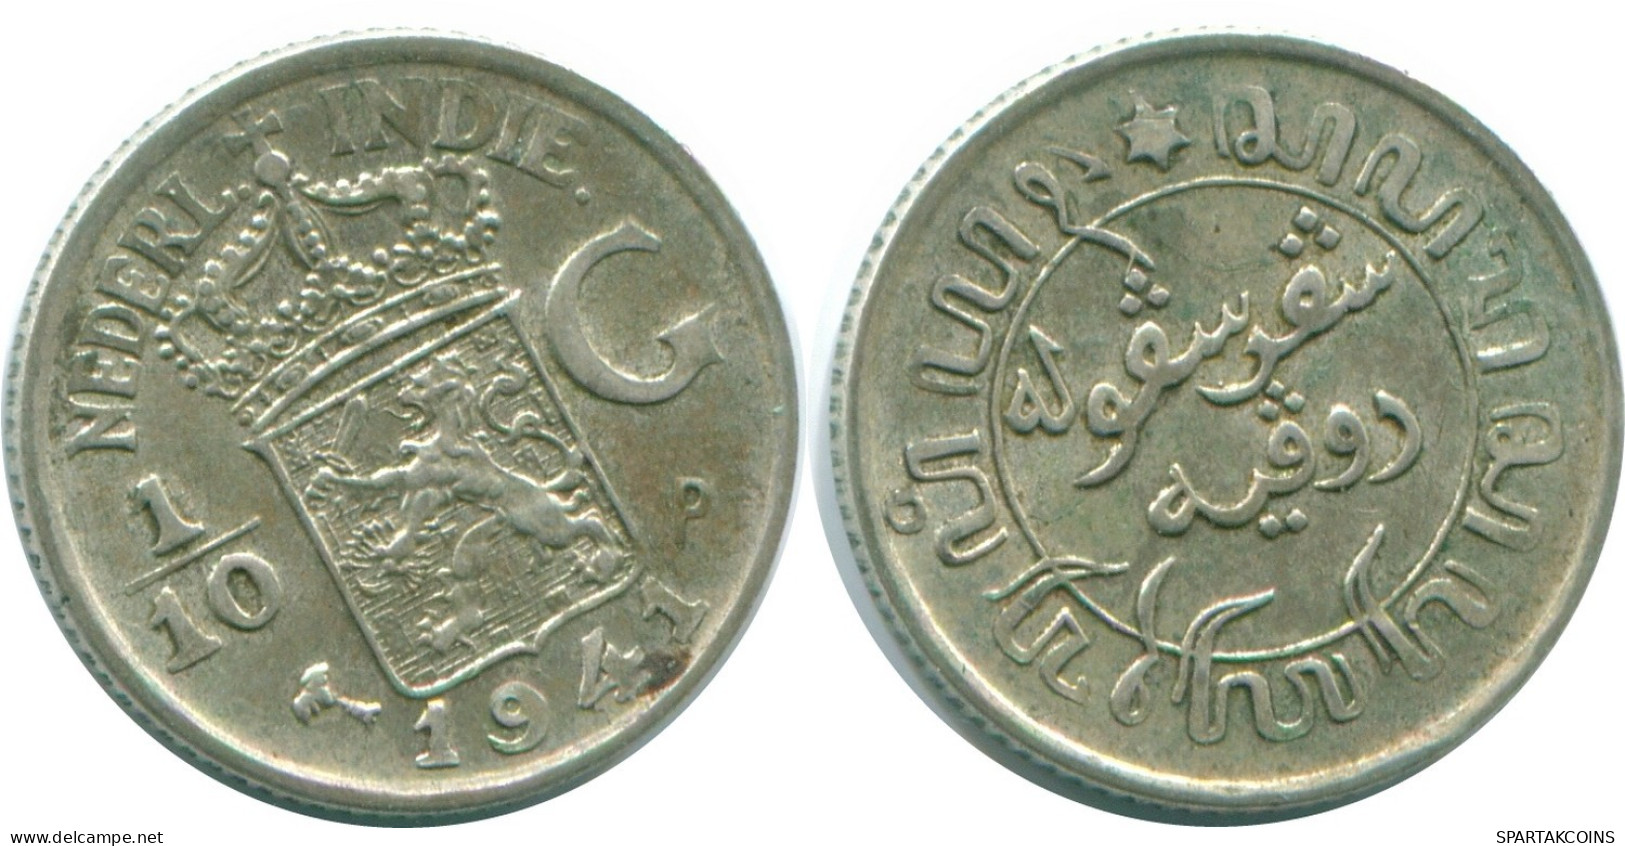 1/10 GULDEN 1941 P NETHERLANDS EAST INDIES SILVER Colonial Coin #NL13801.3.U.A - Dutch East Indies